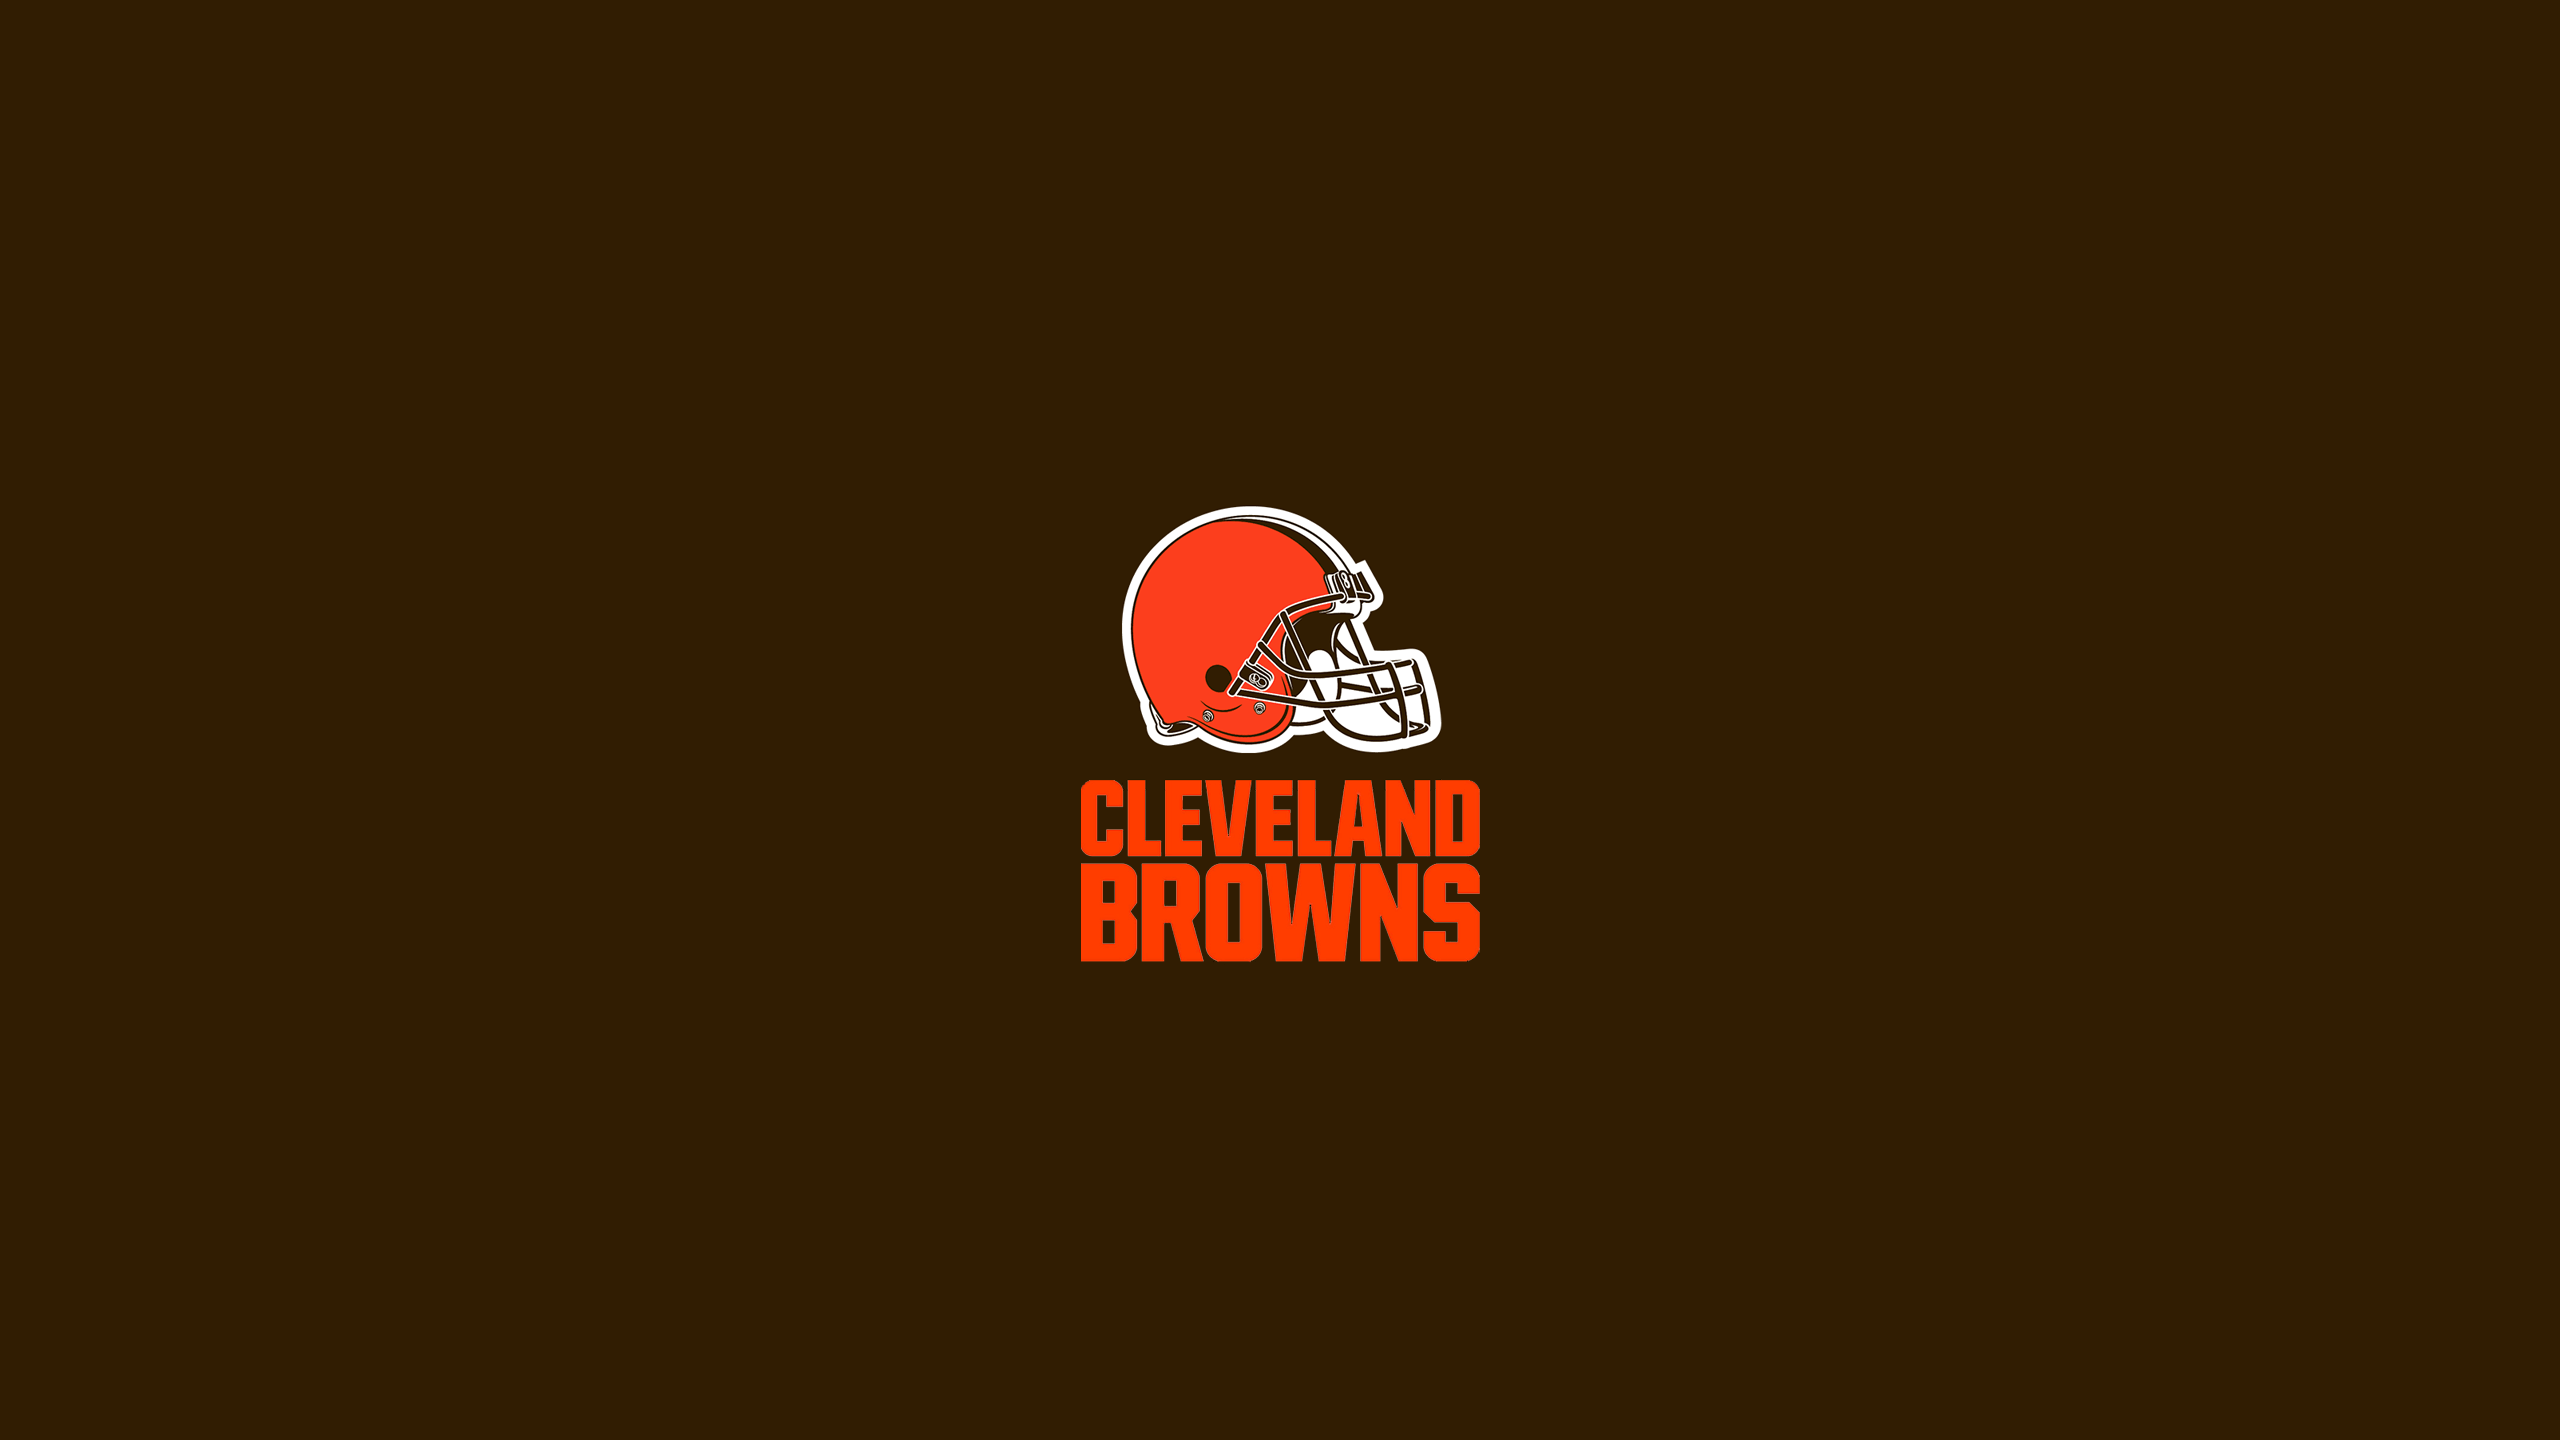 Cleveland Browns HD Wallpapers - Wallpaper Cave